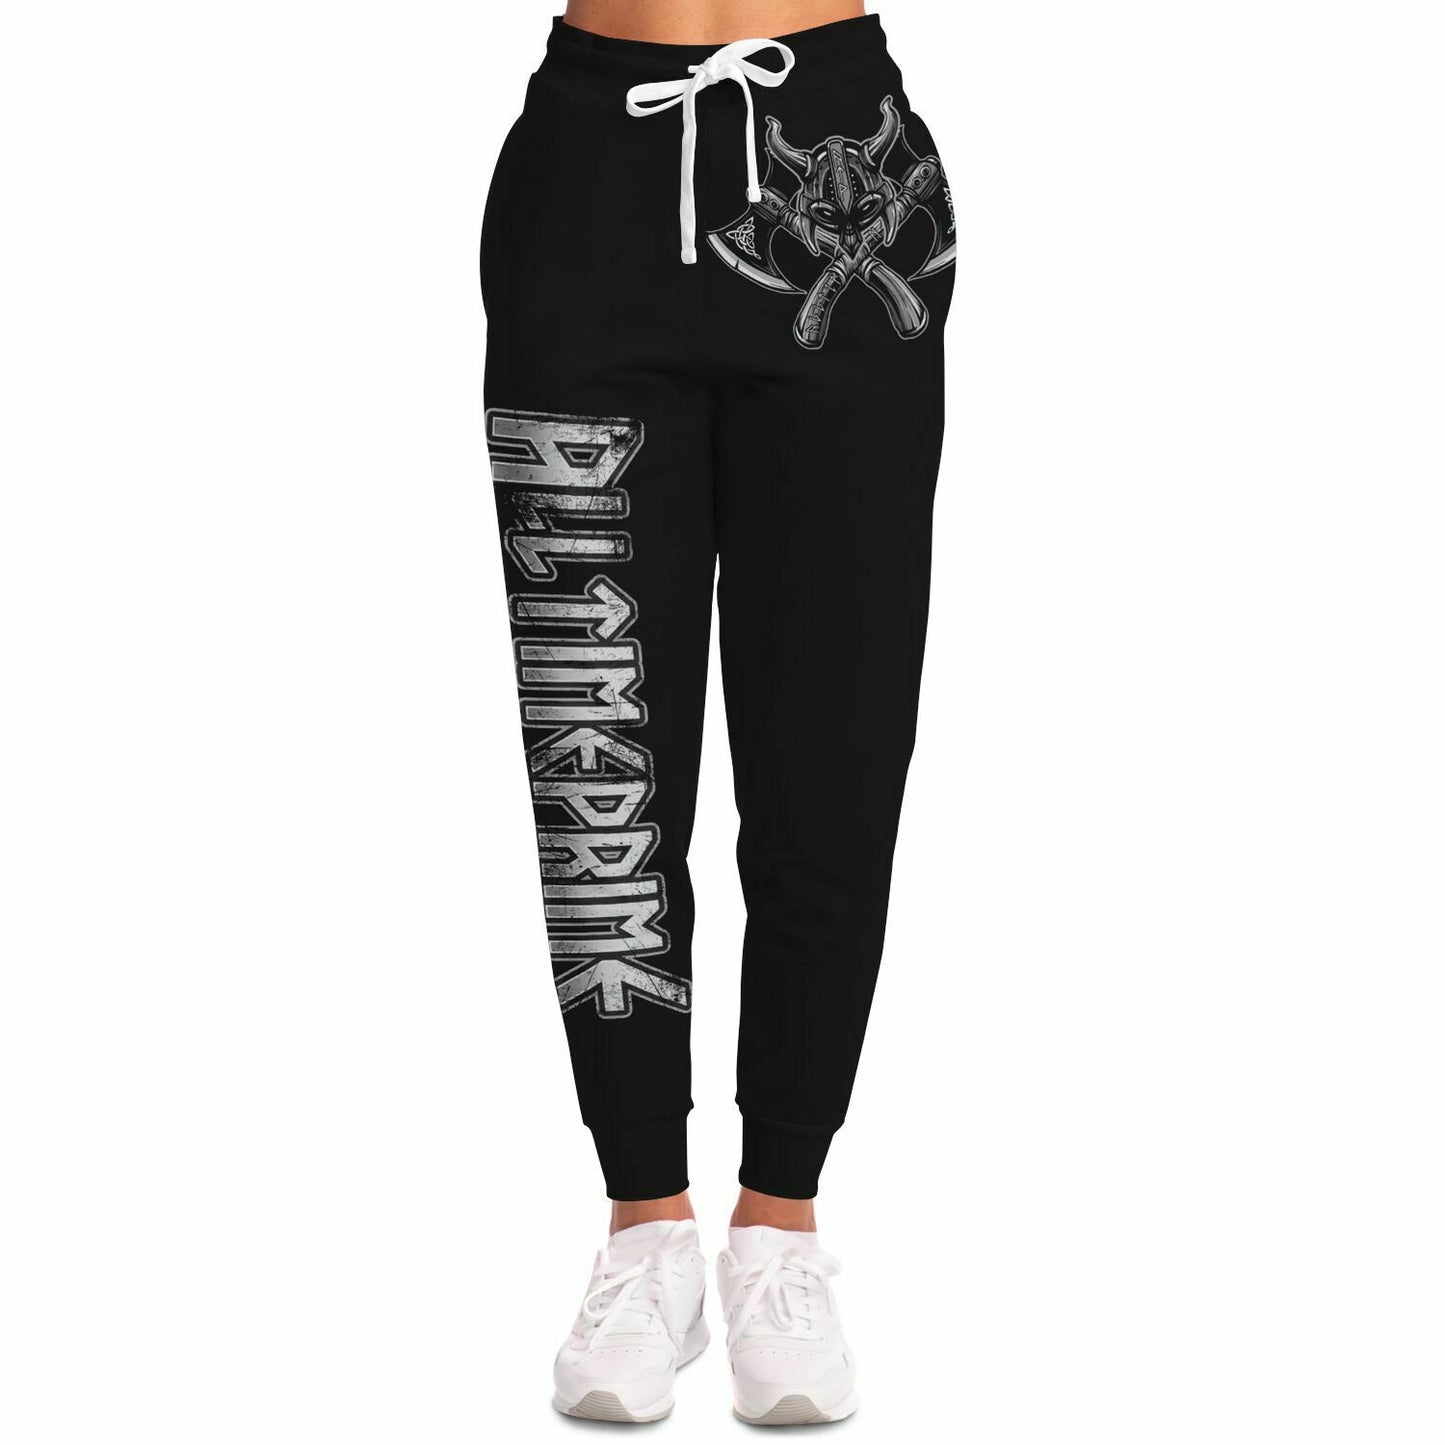 Adult AllTimePrime 'Wares of a Warrior' Fashion Joggers